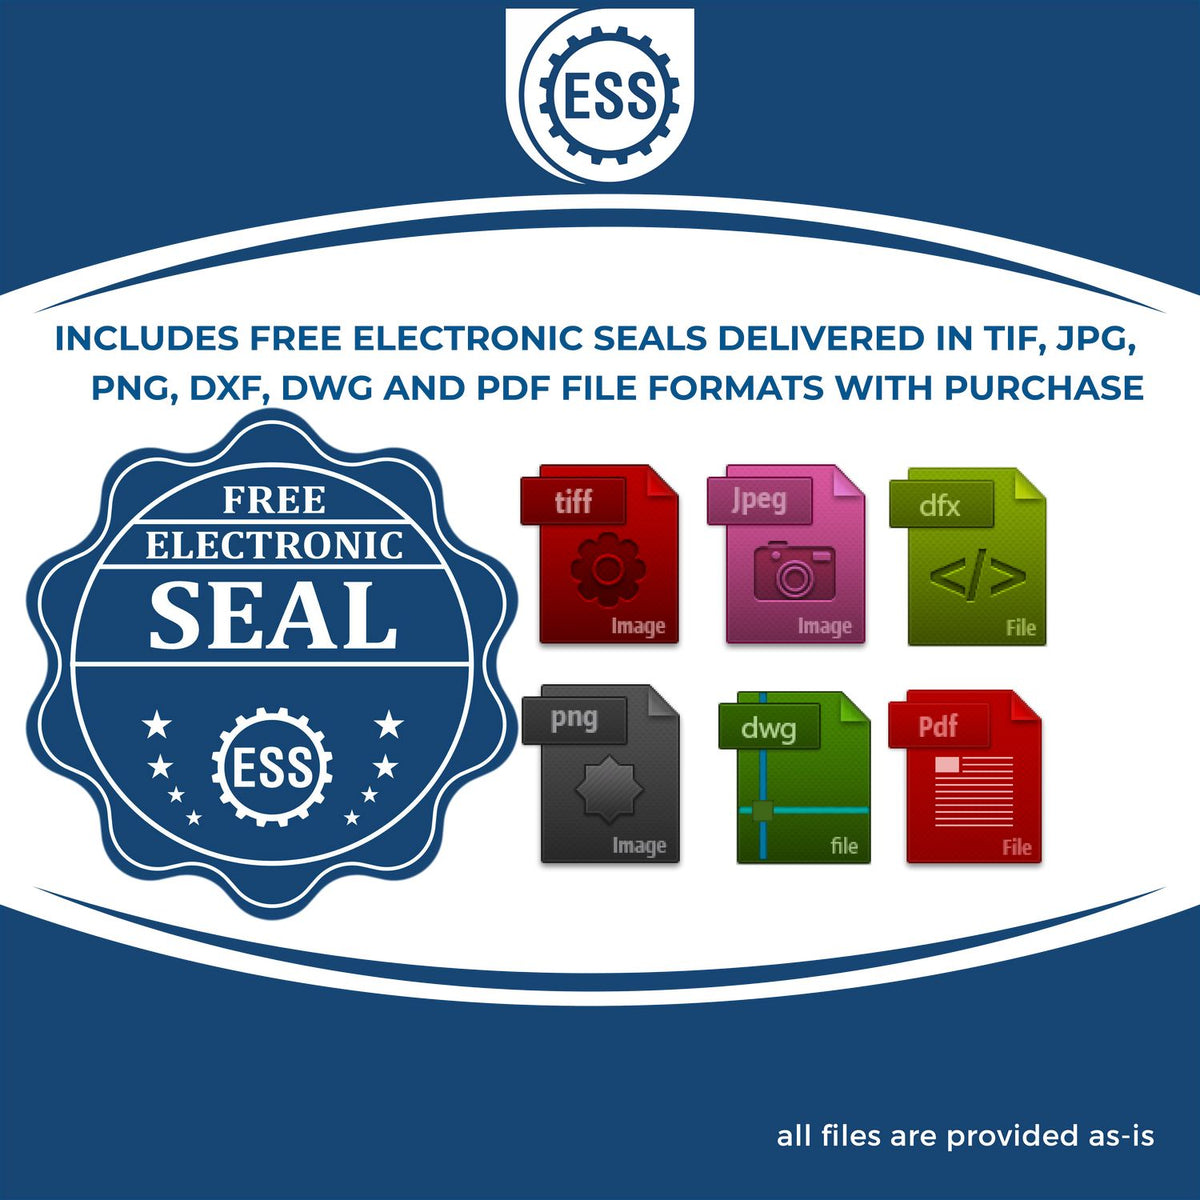 An infographic for the free electronic seal for the Premium MaxLight Pre-Inked Kentucky Landscape Architectural Stamp illustrating the different file type icons such as DXF, DWG, TIF, JPG and PNG.